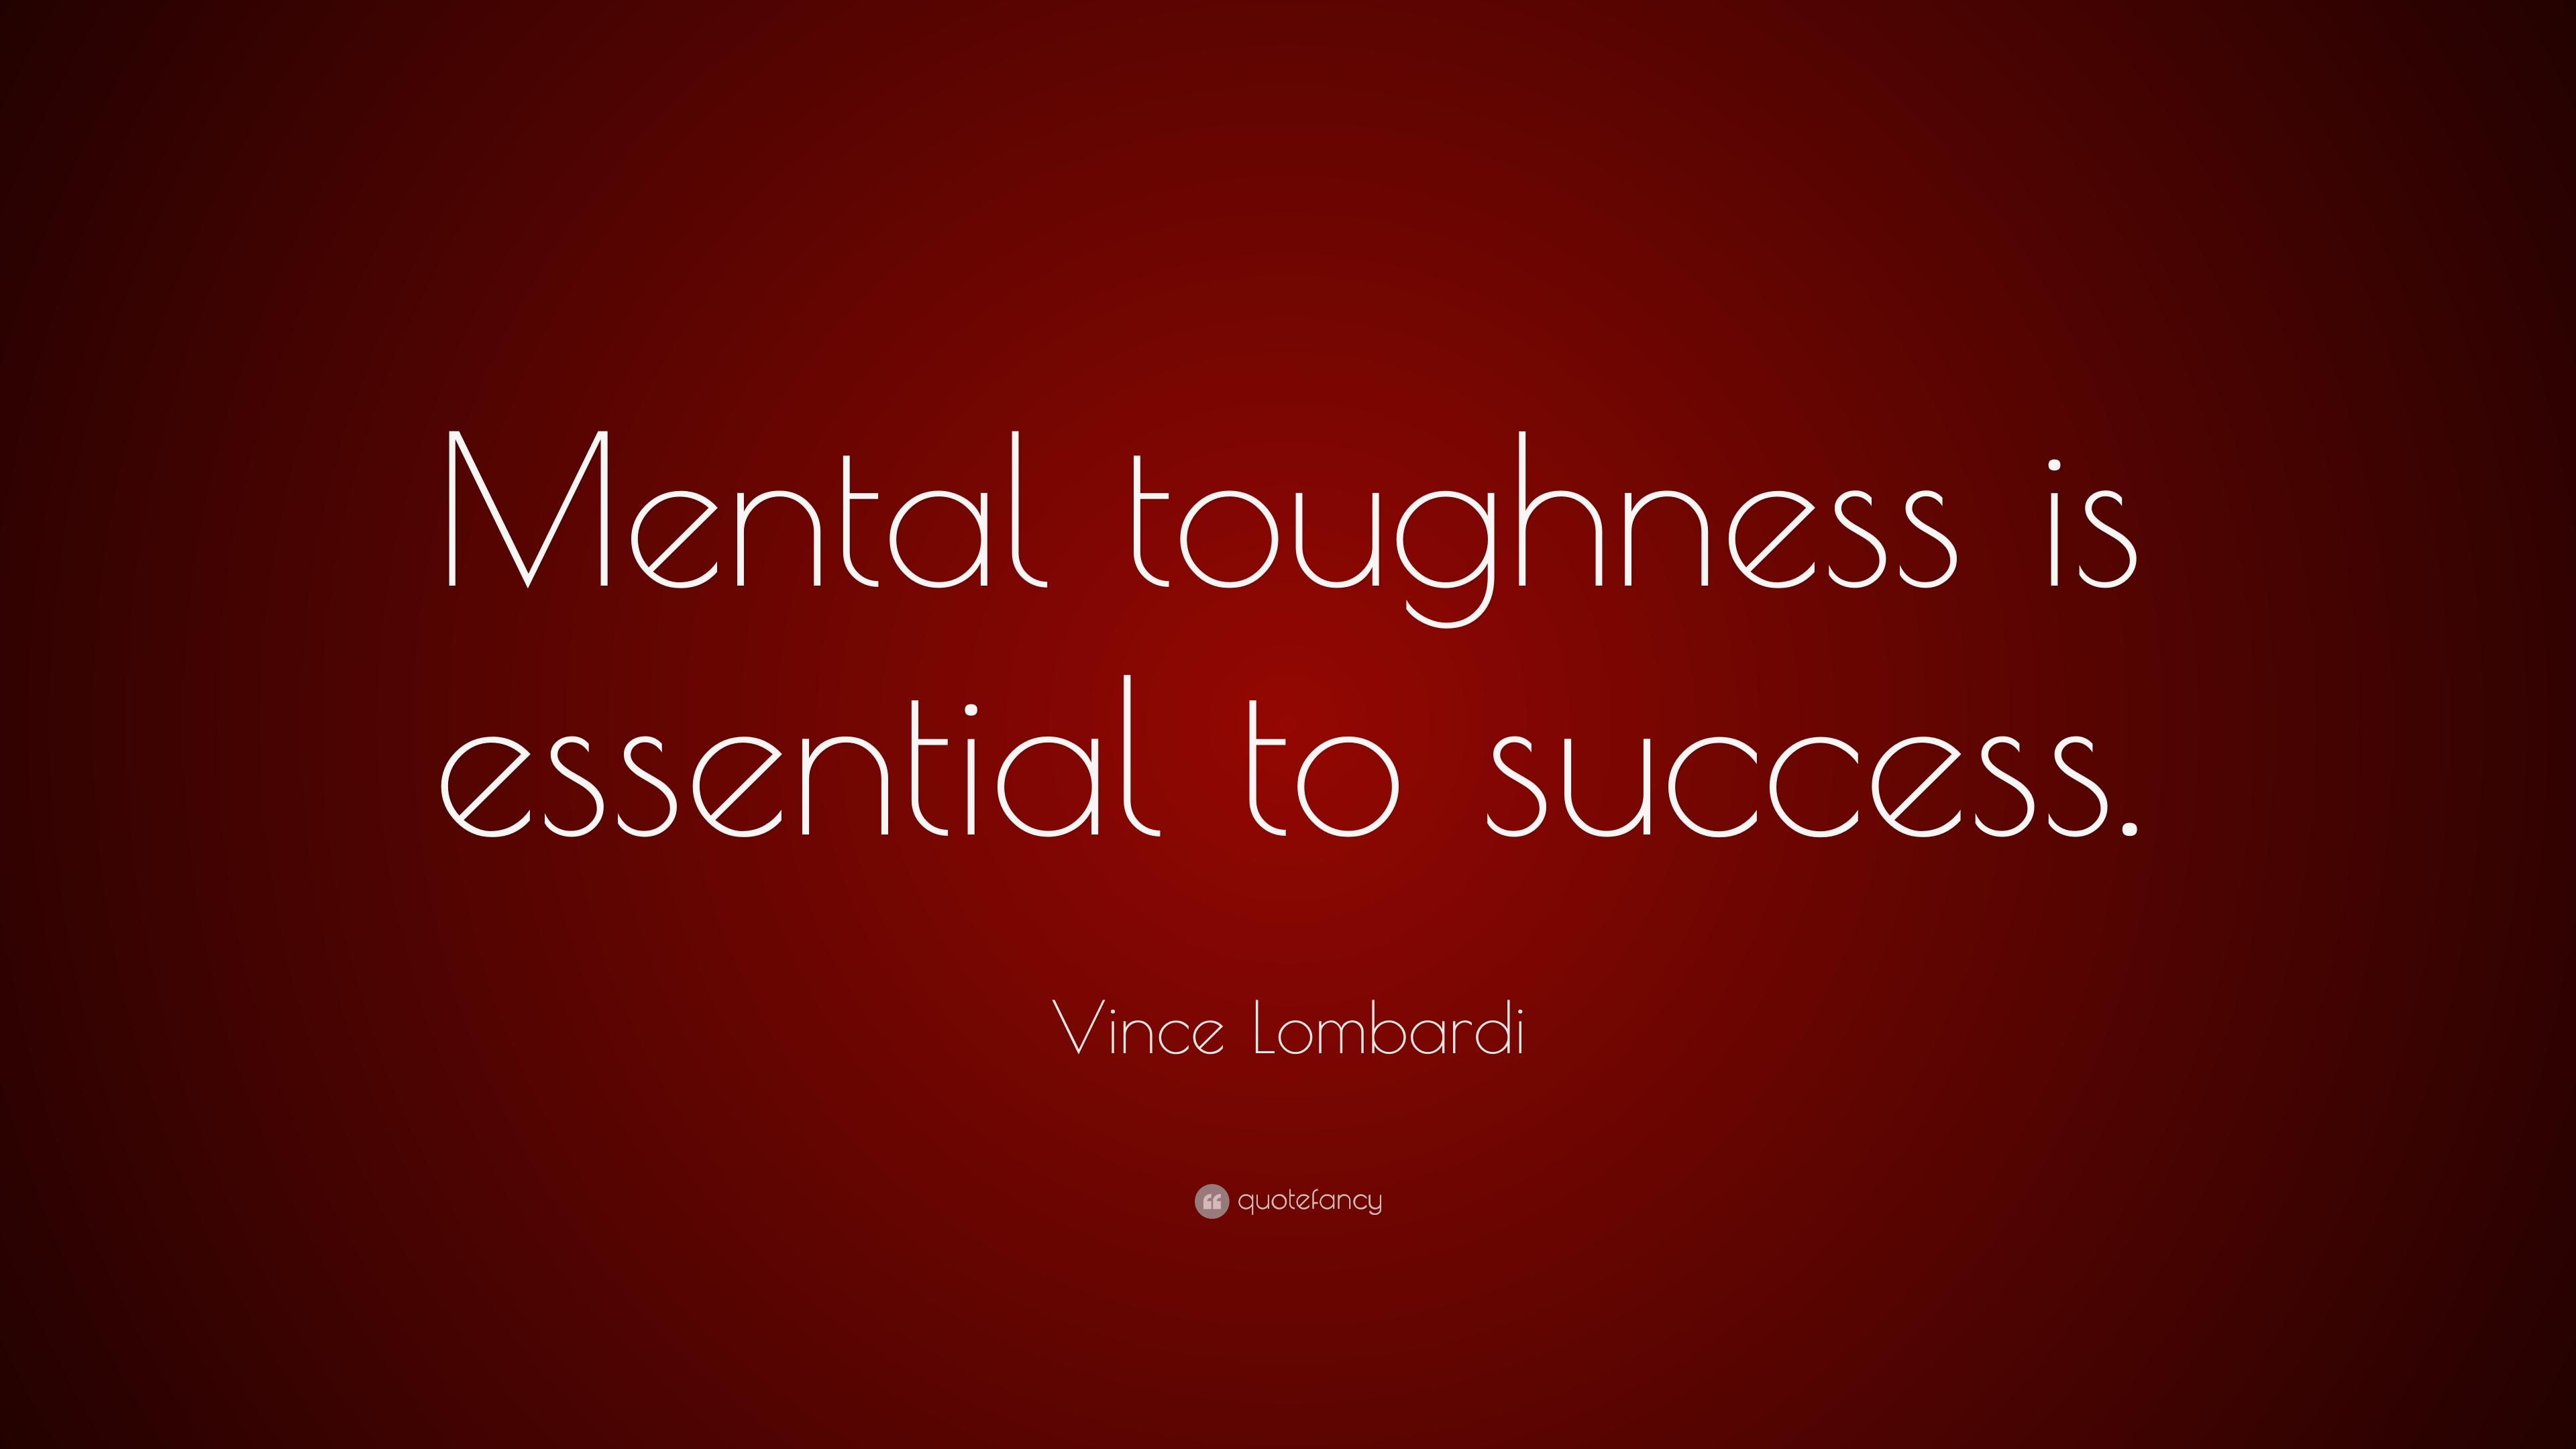 Vince Lombardi Quote: “Mental toughness is essential to